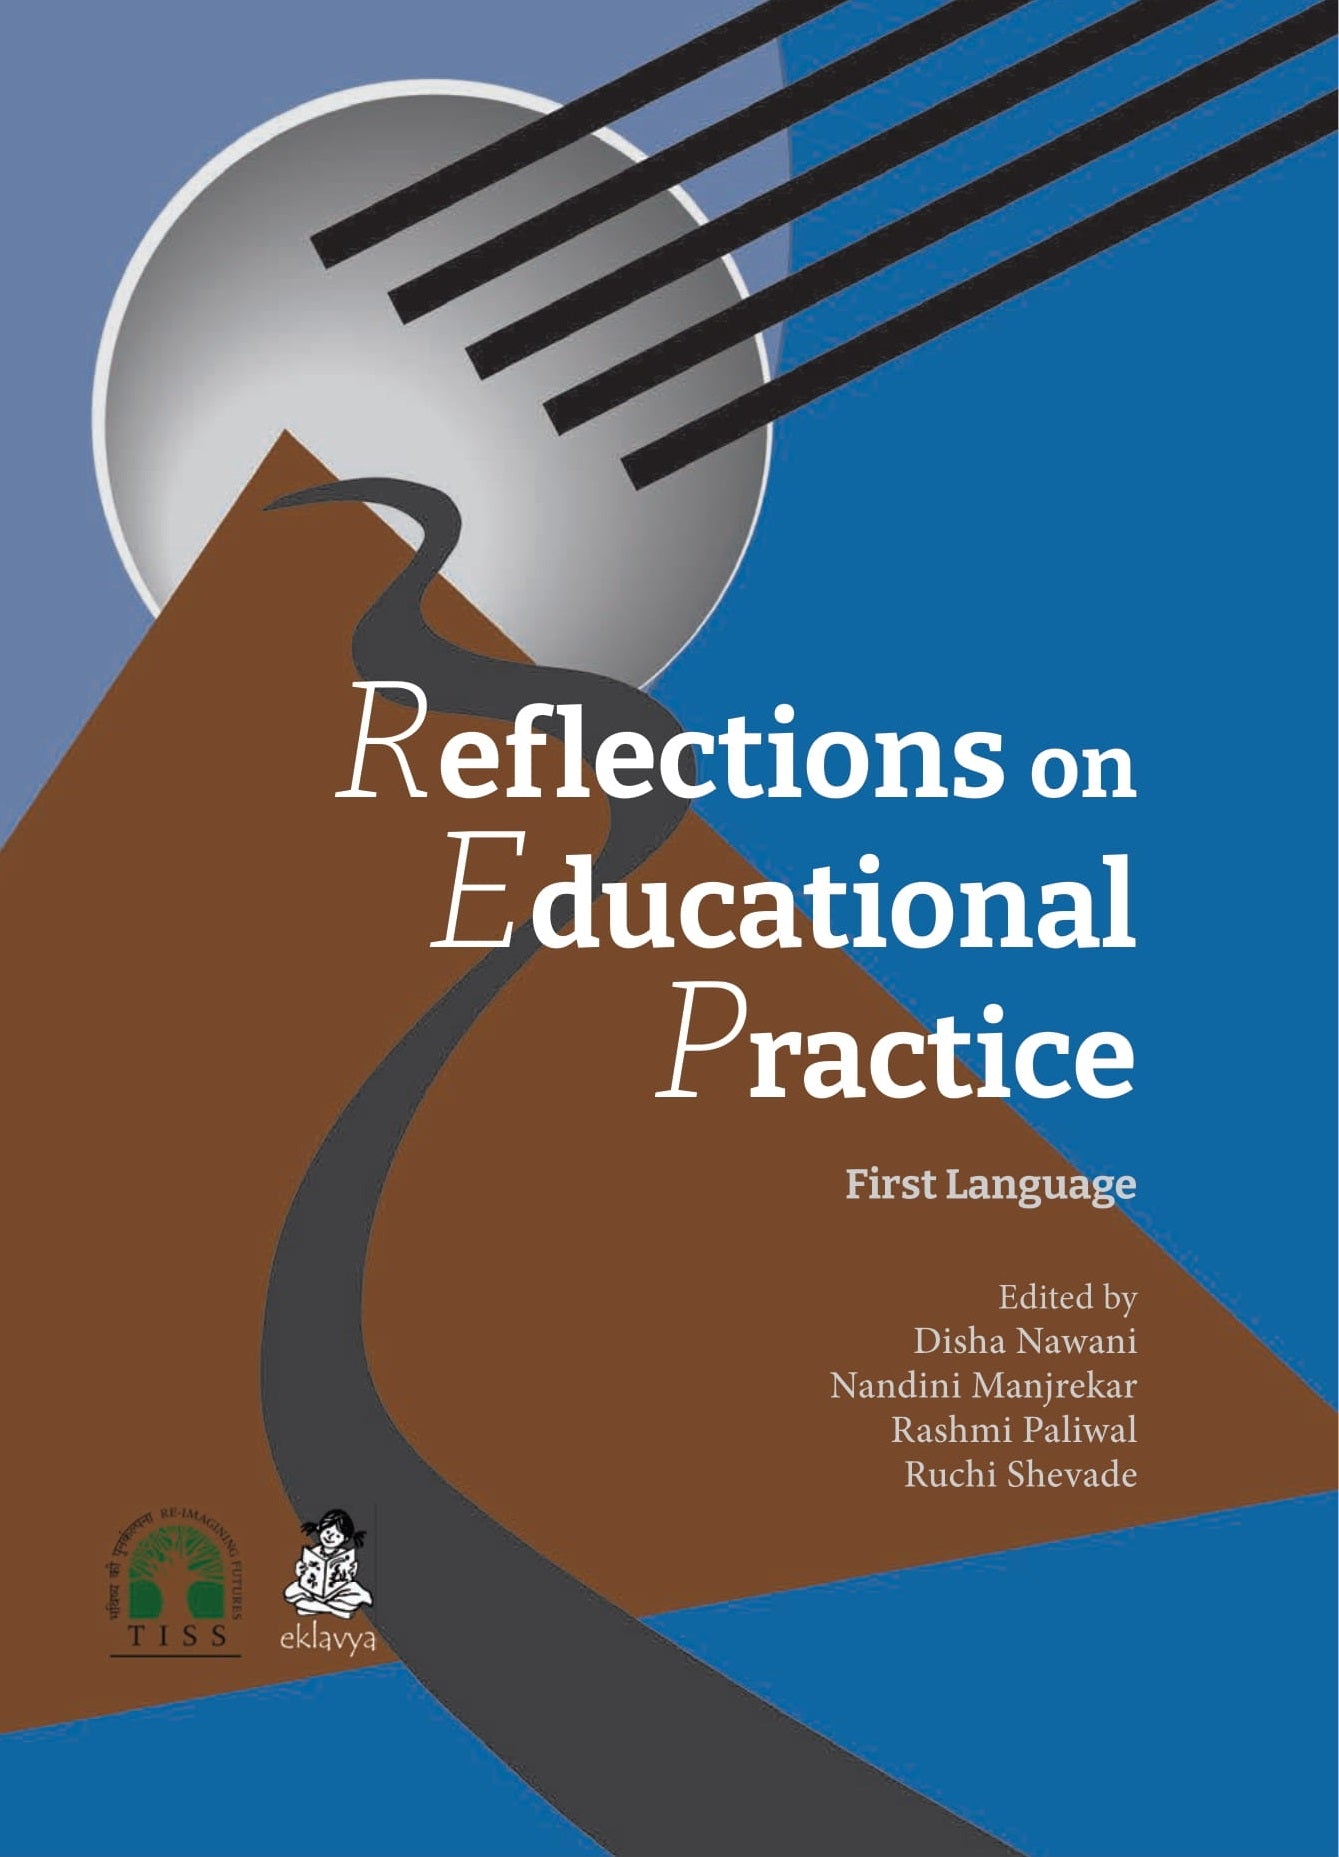 Reflections on Educational Practice -First language